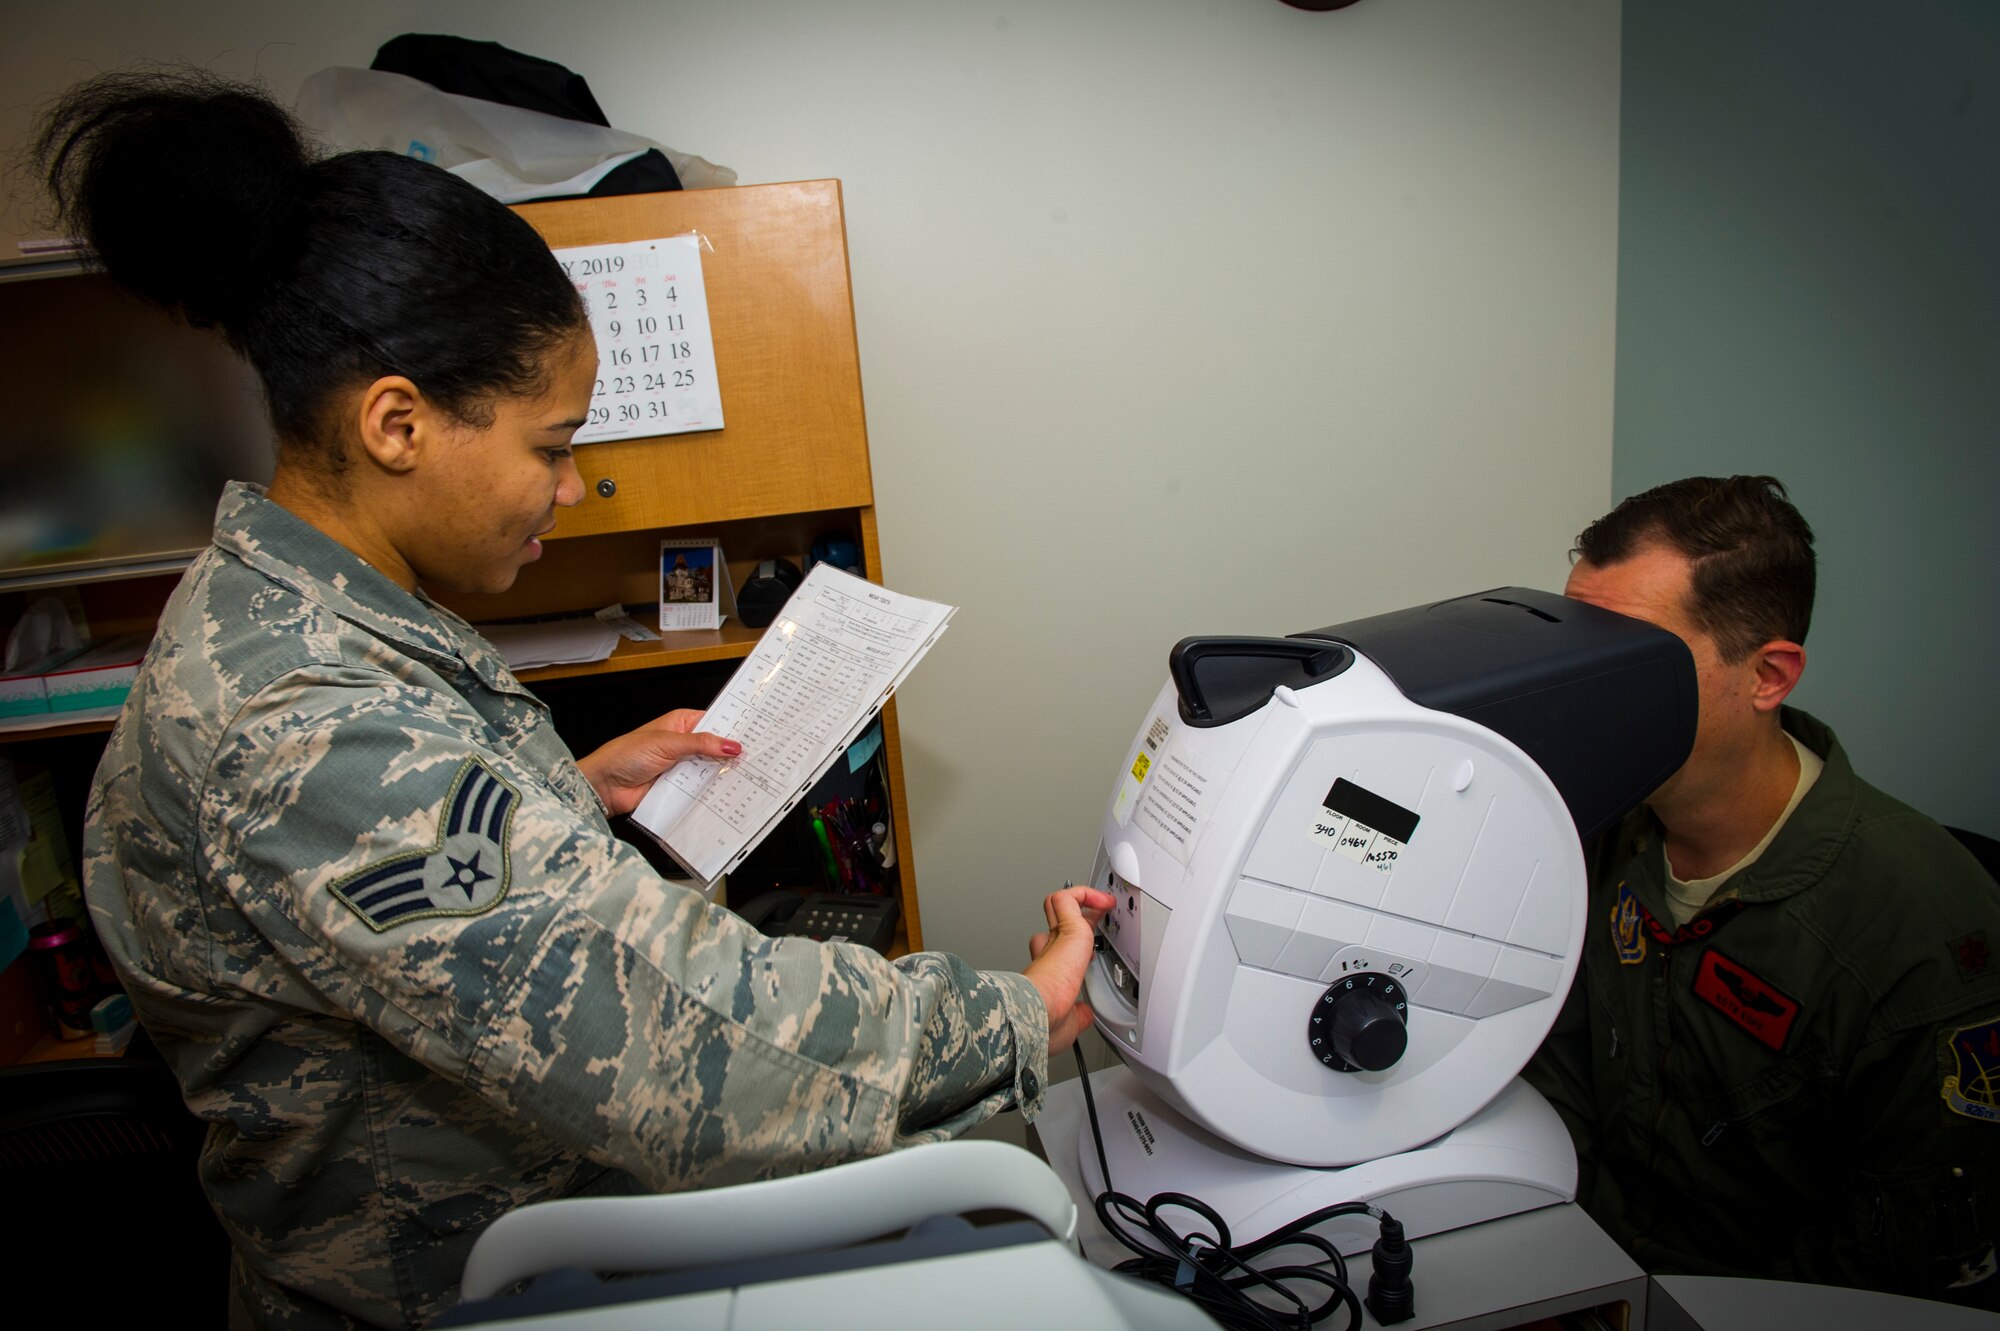 U.S. Air Force Senior Airman Rayne Patton, 926th Aerospace Medicine Squadron optical technician, reads a visual chart to a patient inside the medical clinic, July 13, 2019 at Nellis Air Force Base, Nev. The 926 AMDS works cohesively to ensure all Reserve personnel assigned are medically and operationally ready to fulfill the wing's mission. (U.S. Air Force photo/Senior Airman Brett Clashman)